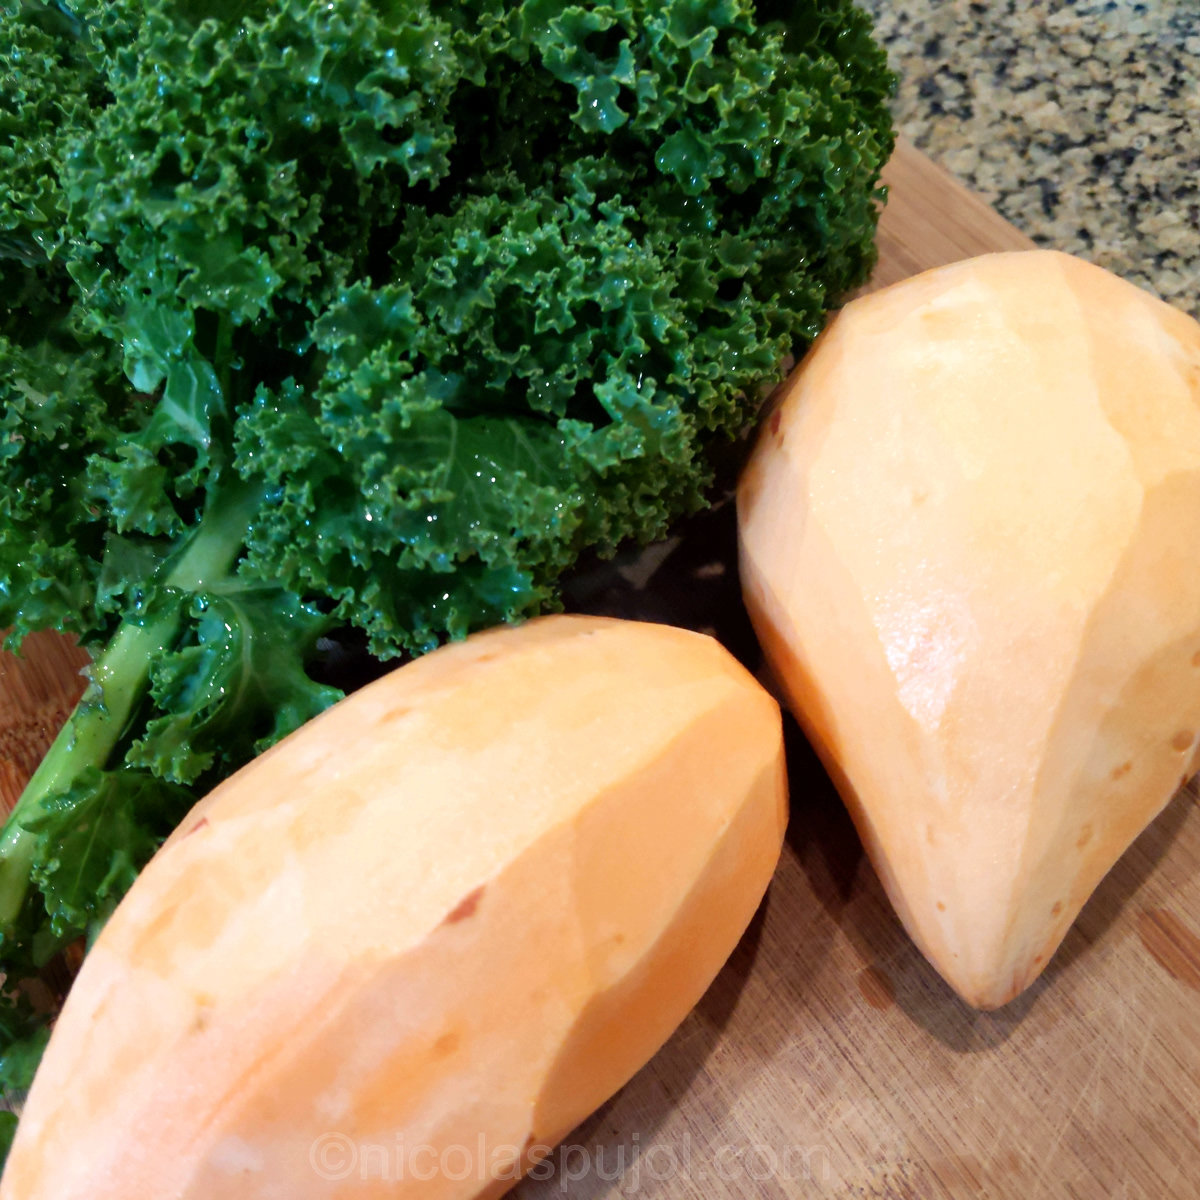 Peeled sweet potatoes and kale for salad preparation